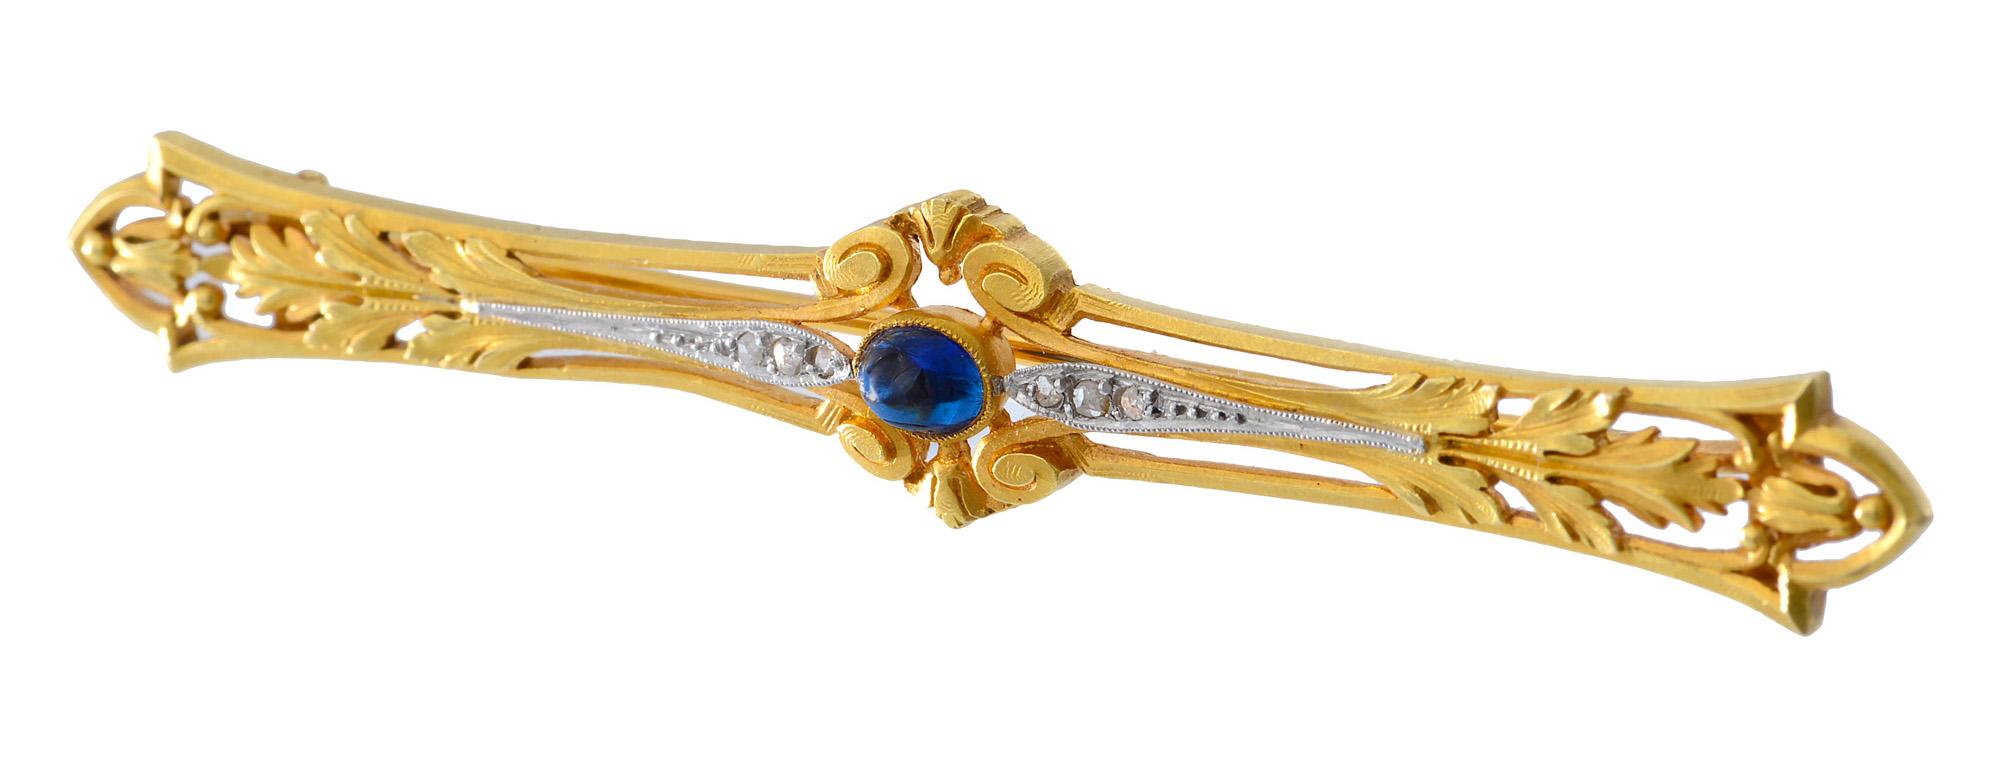 A crisp and beautifully made French gold brooch set to the centre with a pretty cabochon sapphire with three platinum set diamonds to either side. The terminals of the brooch are adorned with foliate design gold work. It is 1.2 cm at its widest